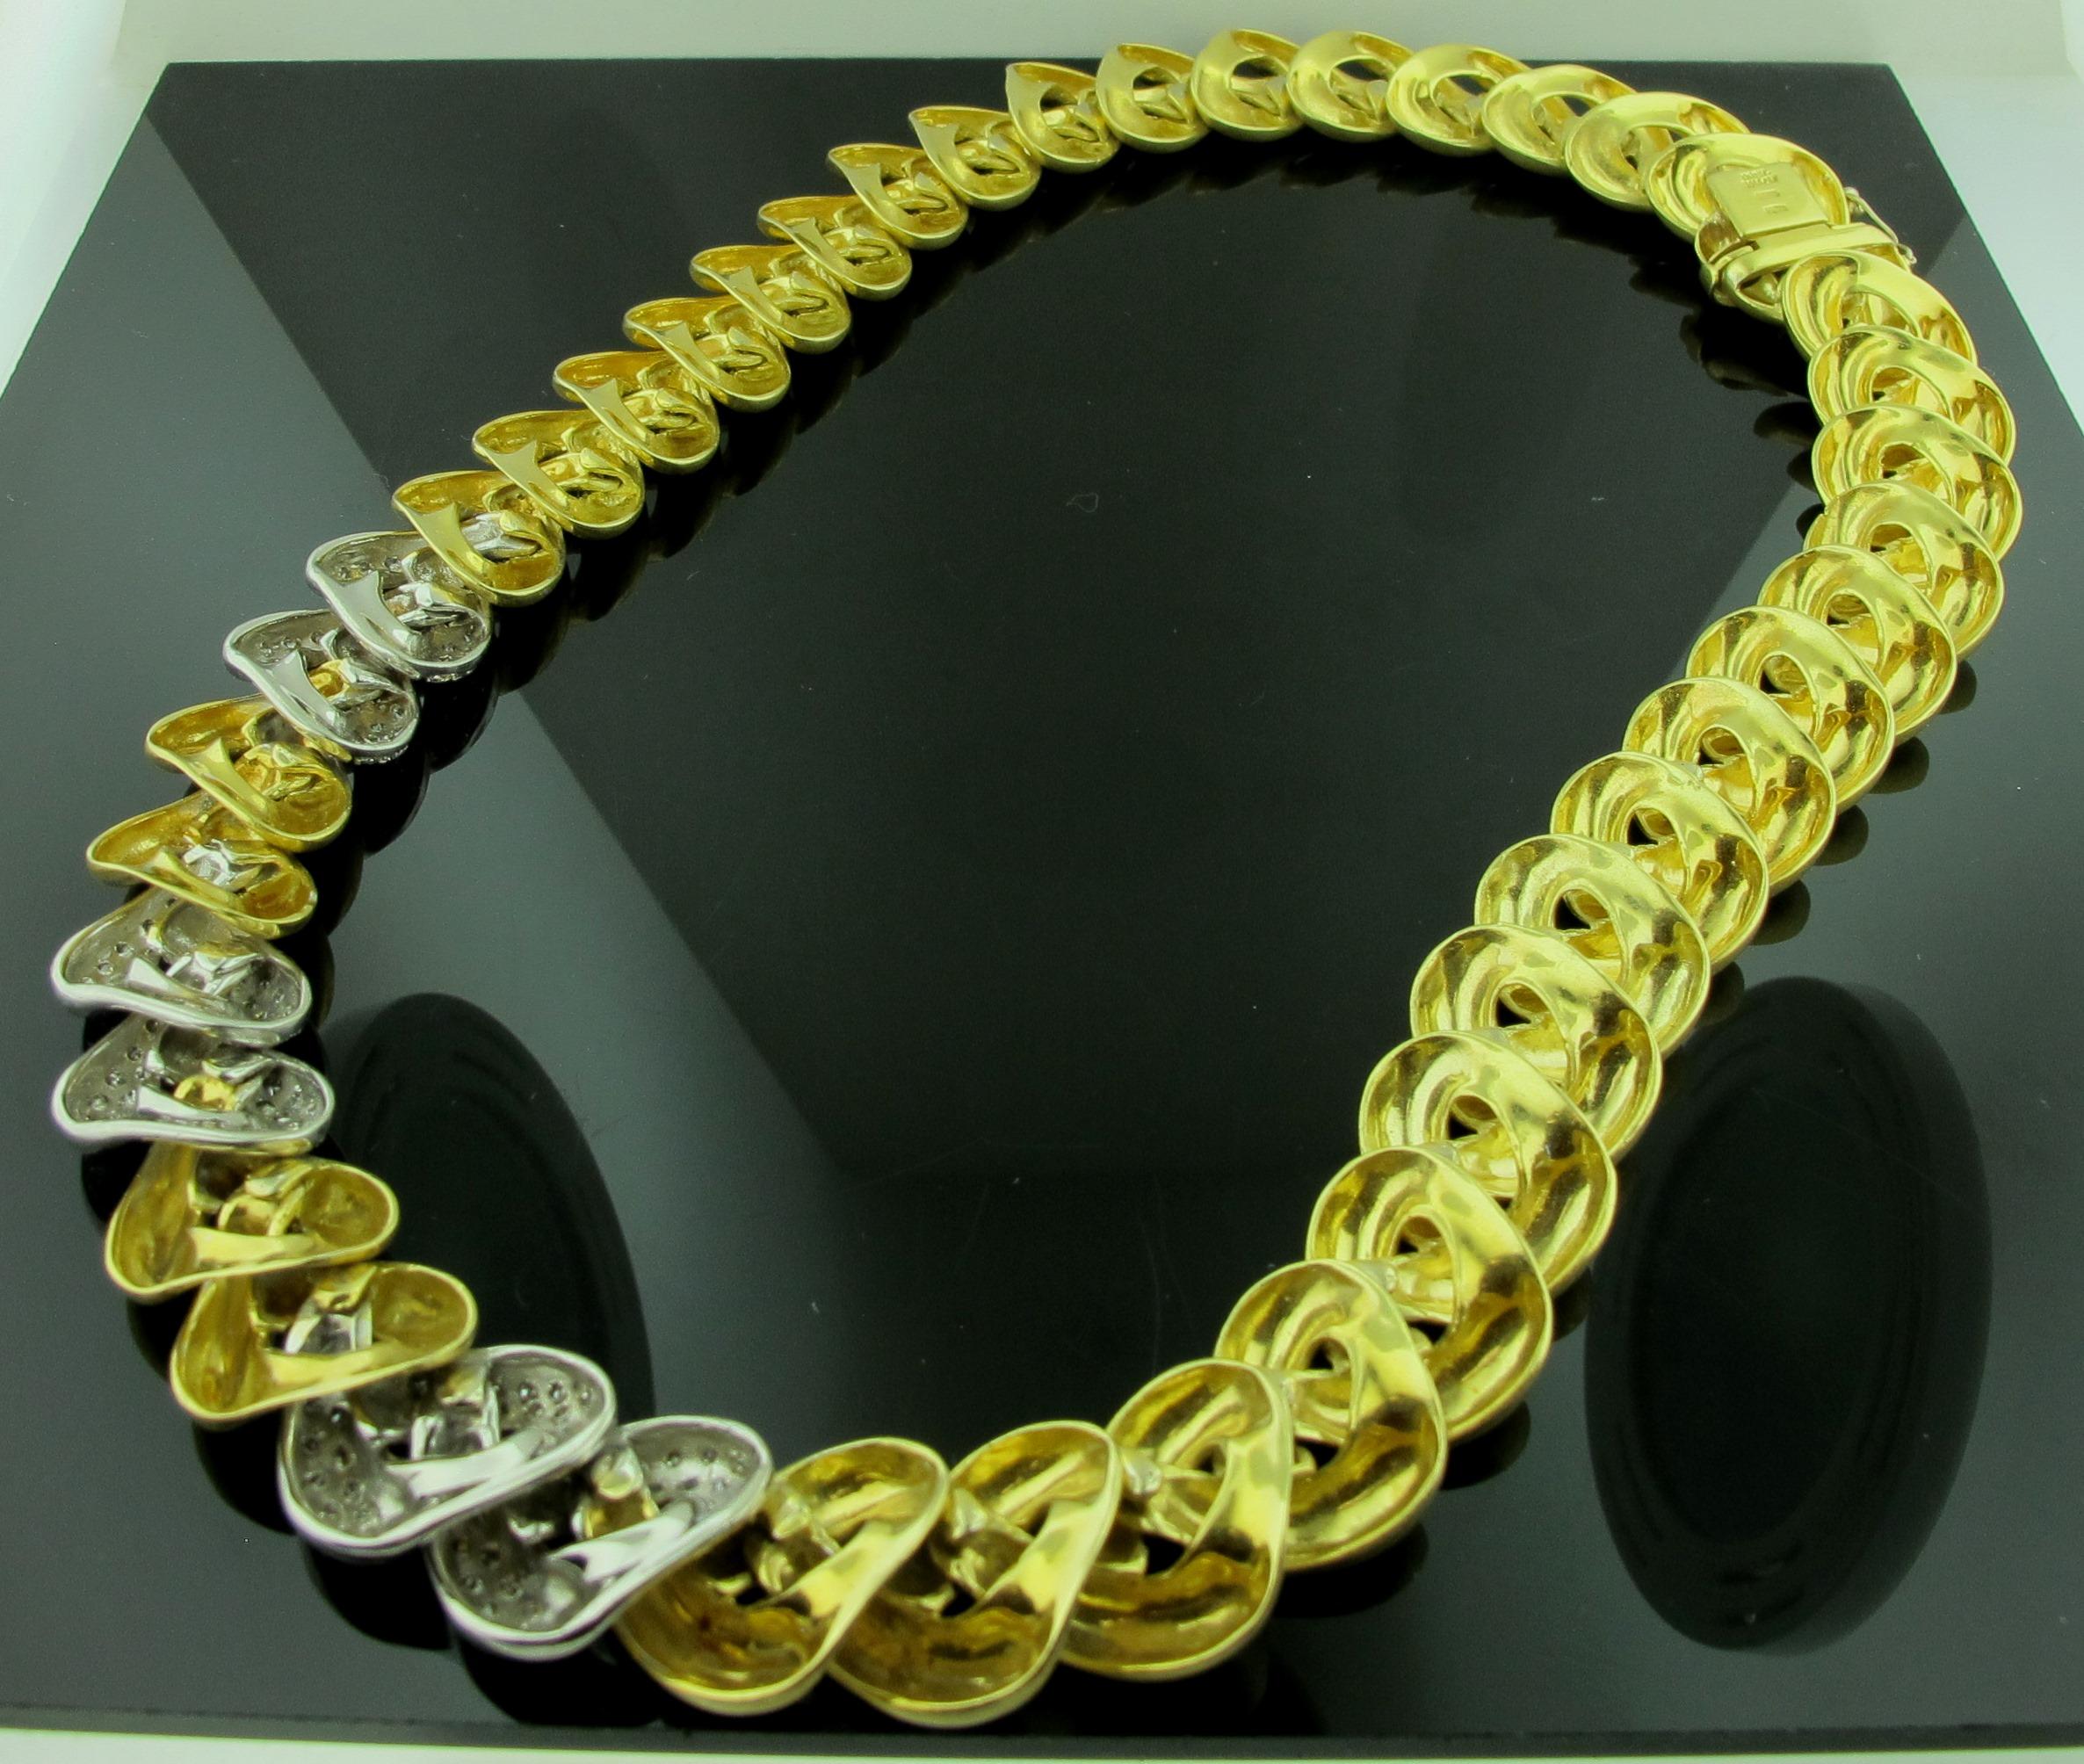 Round Cut 18 Karat Yellow Gold and Diamond Woven Necklace in Matte Finish